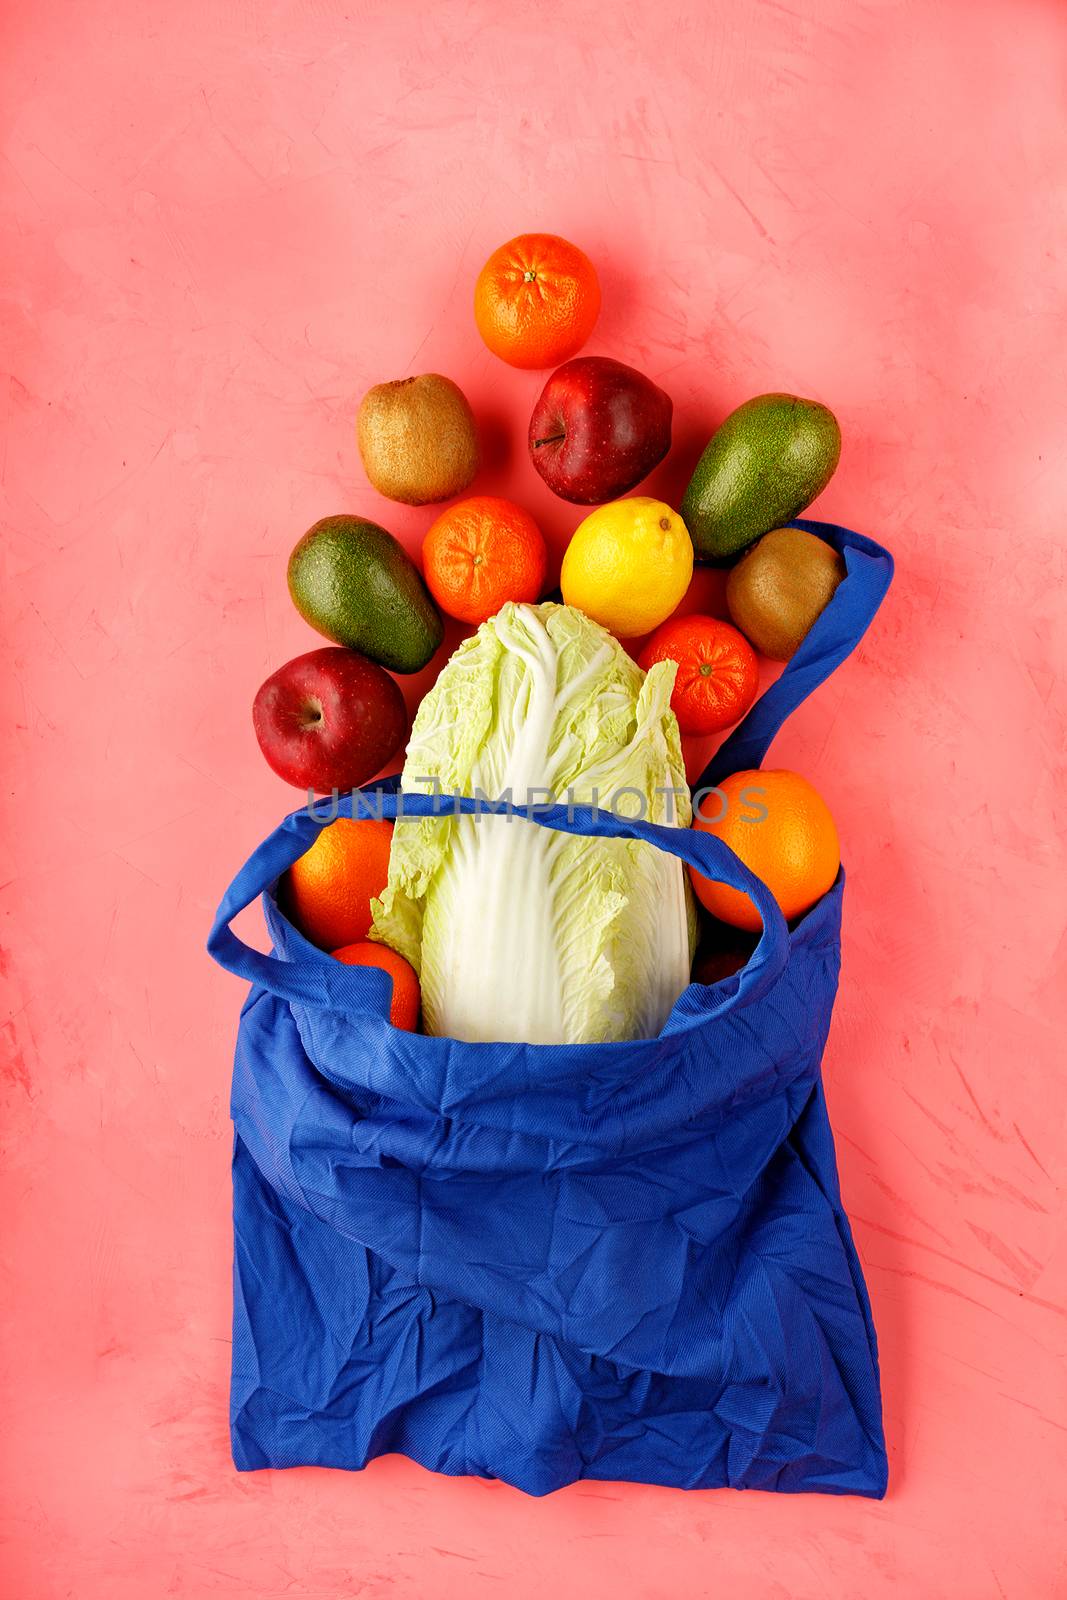 Zero waste food shopping, eco natural bags with fruits and vegetables. by Sergii